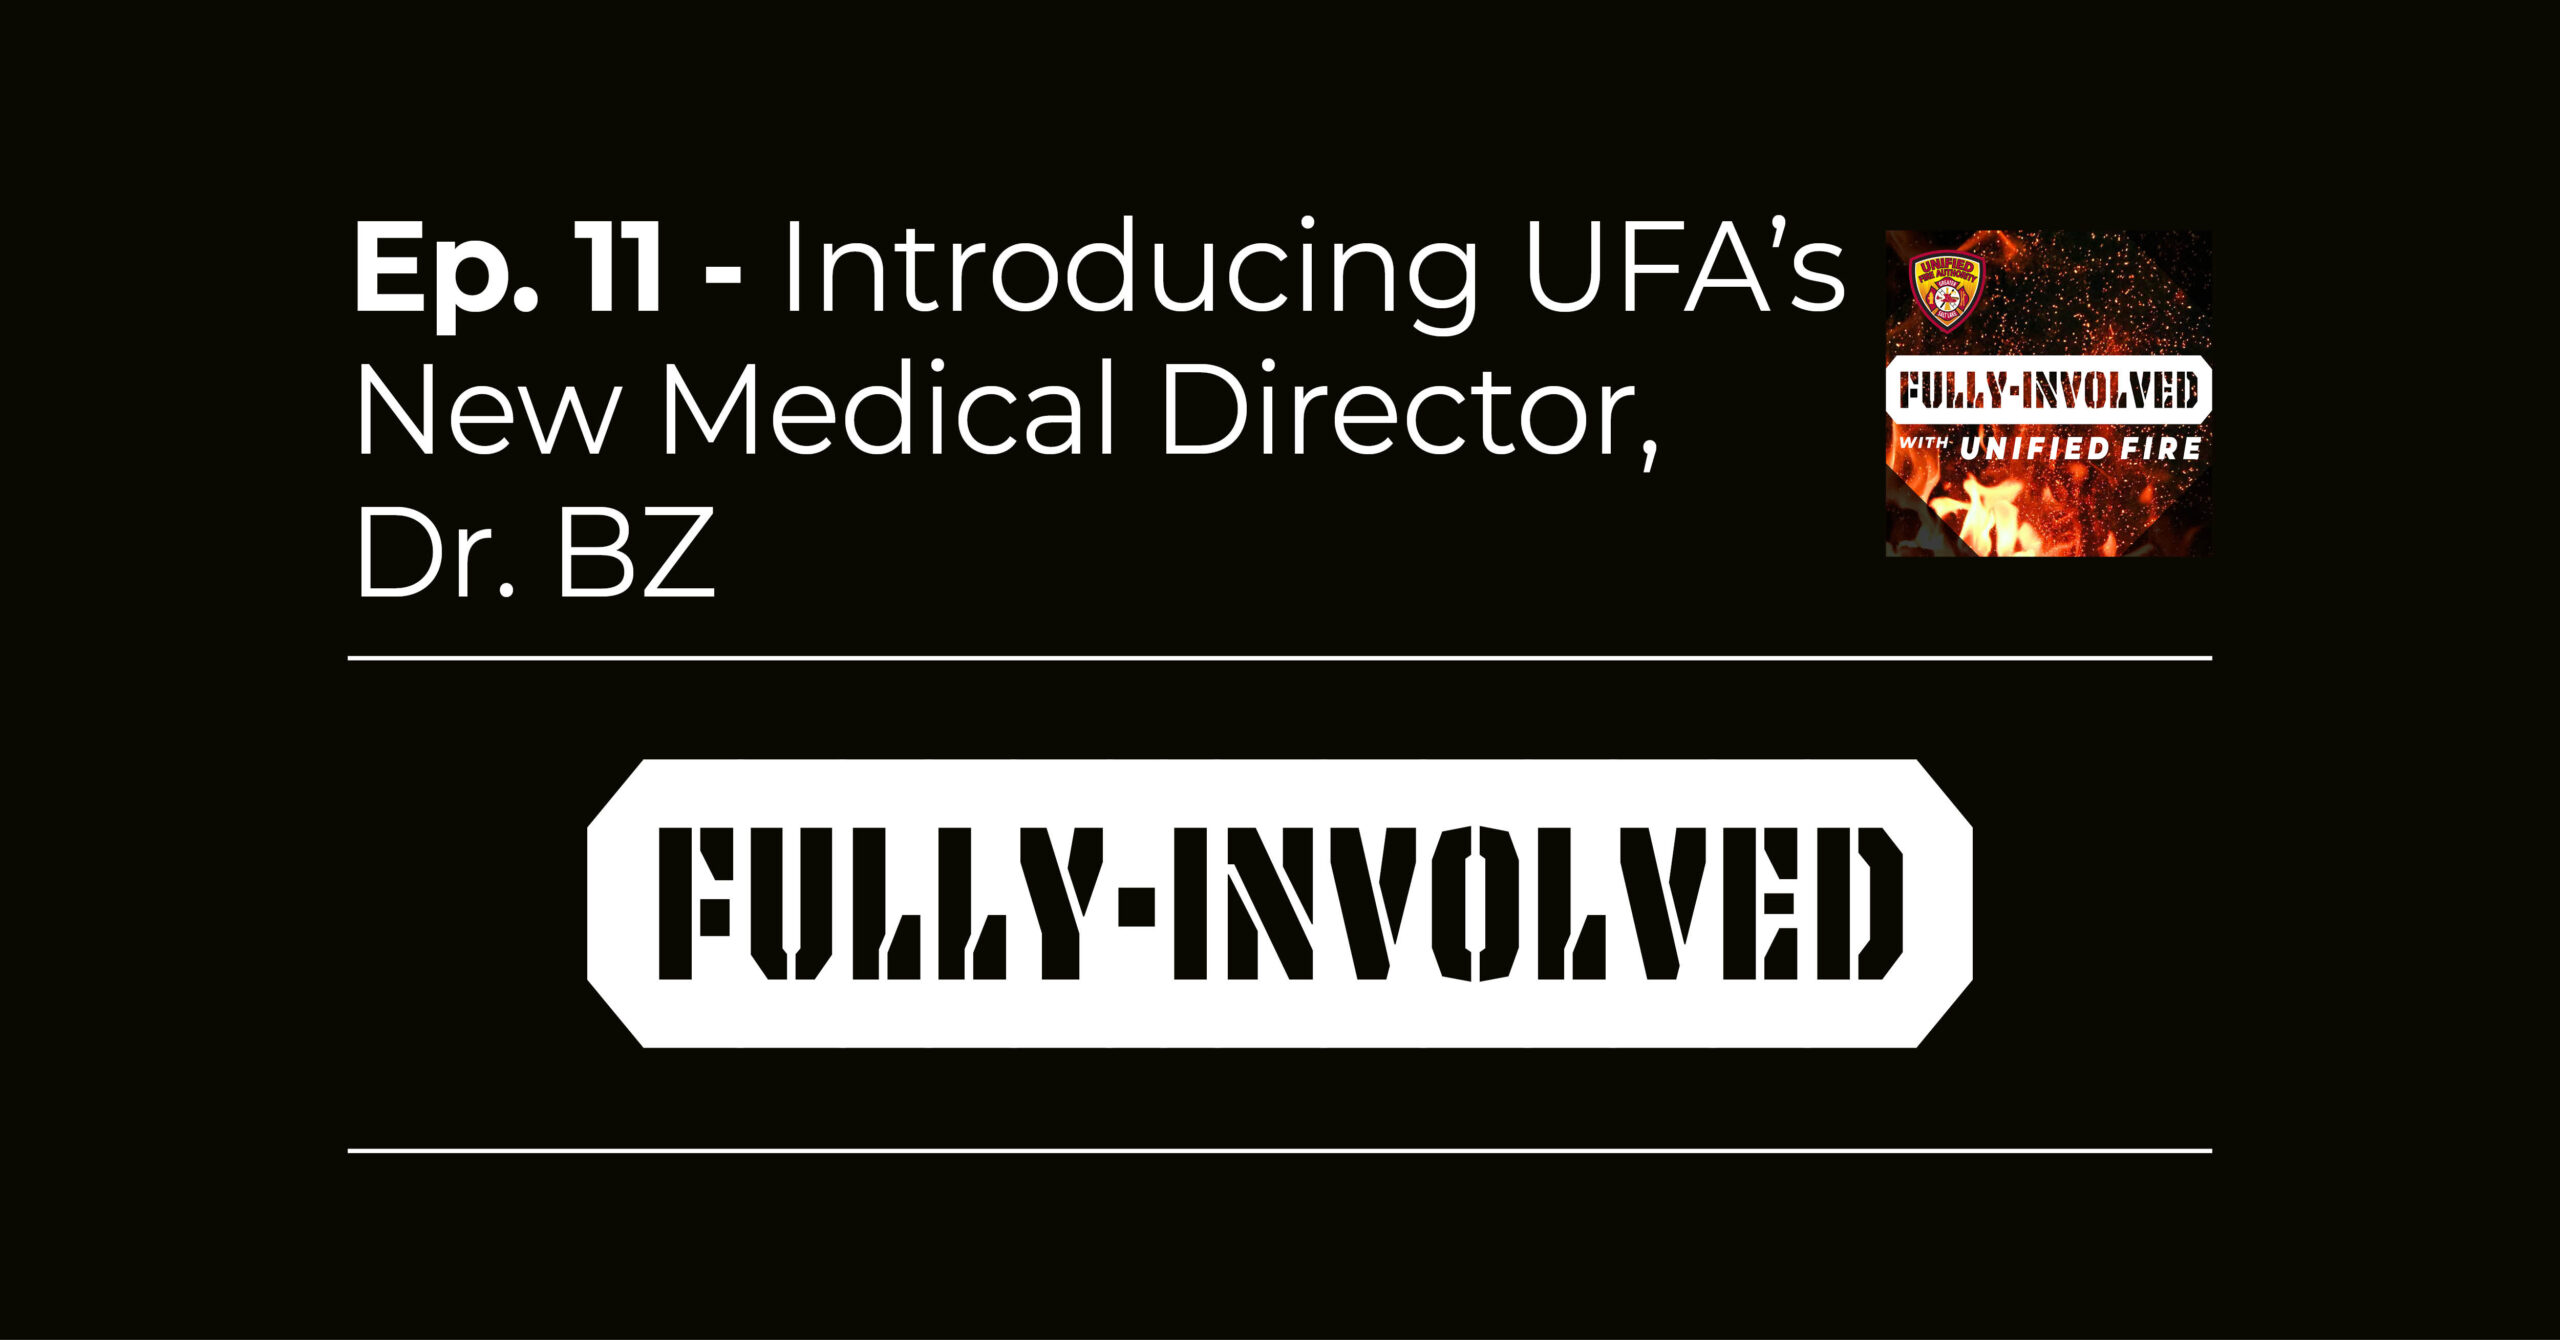 Fully Involved Ep. 11 - Introducing UFA's New Medical Director, Dr. BZ